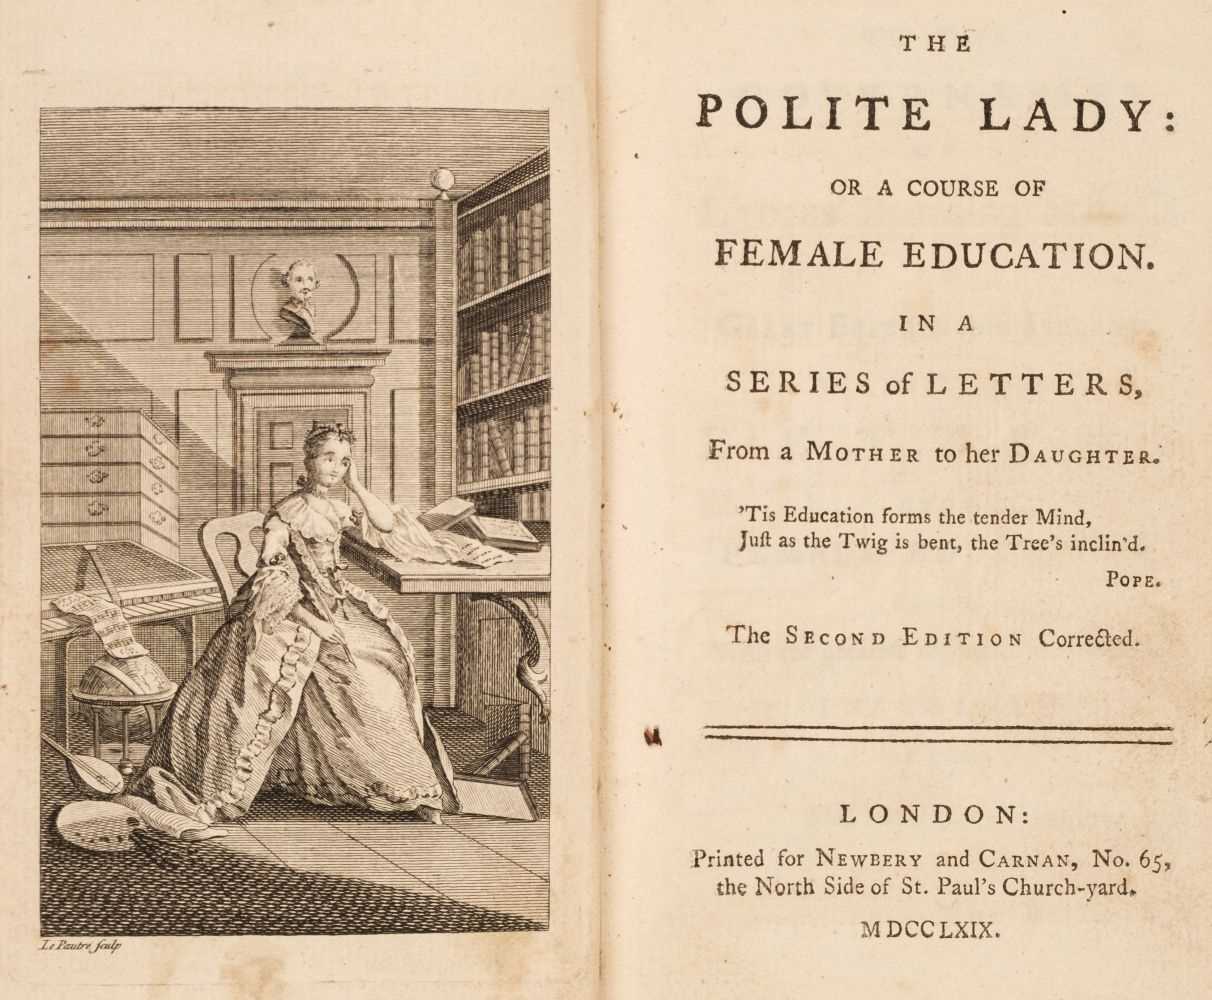 Lot 418 - Allen (Charles). The Polite Lady: or a course of Female Education, 1769